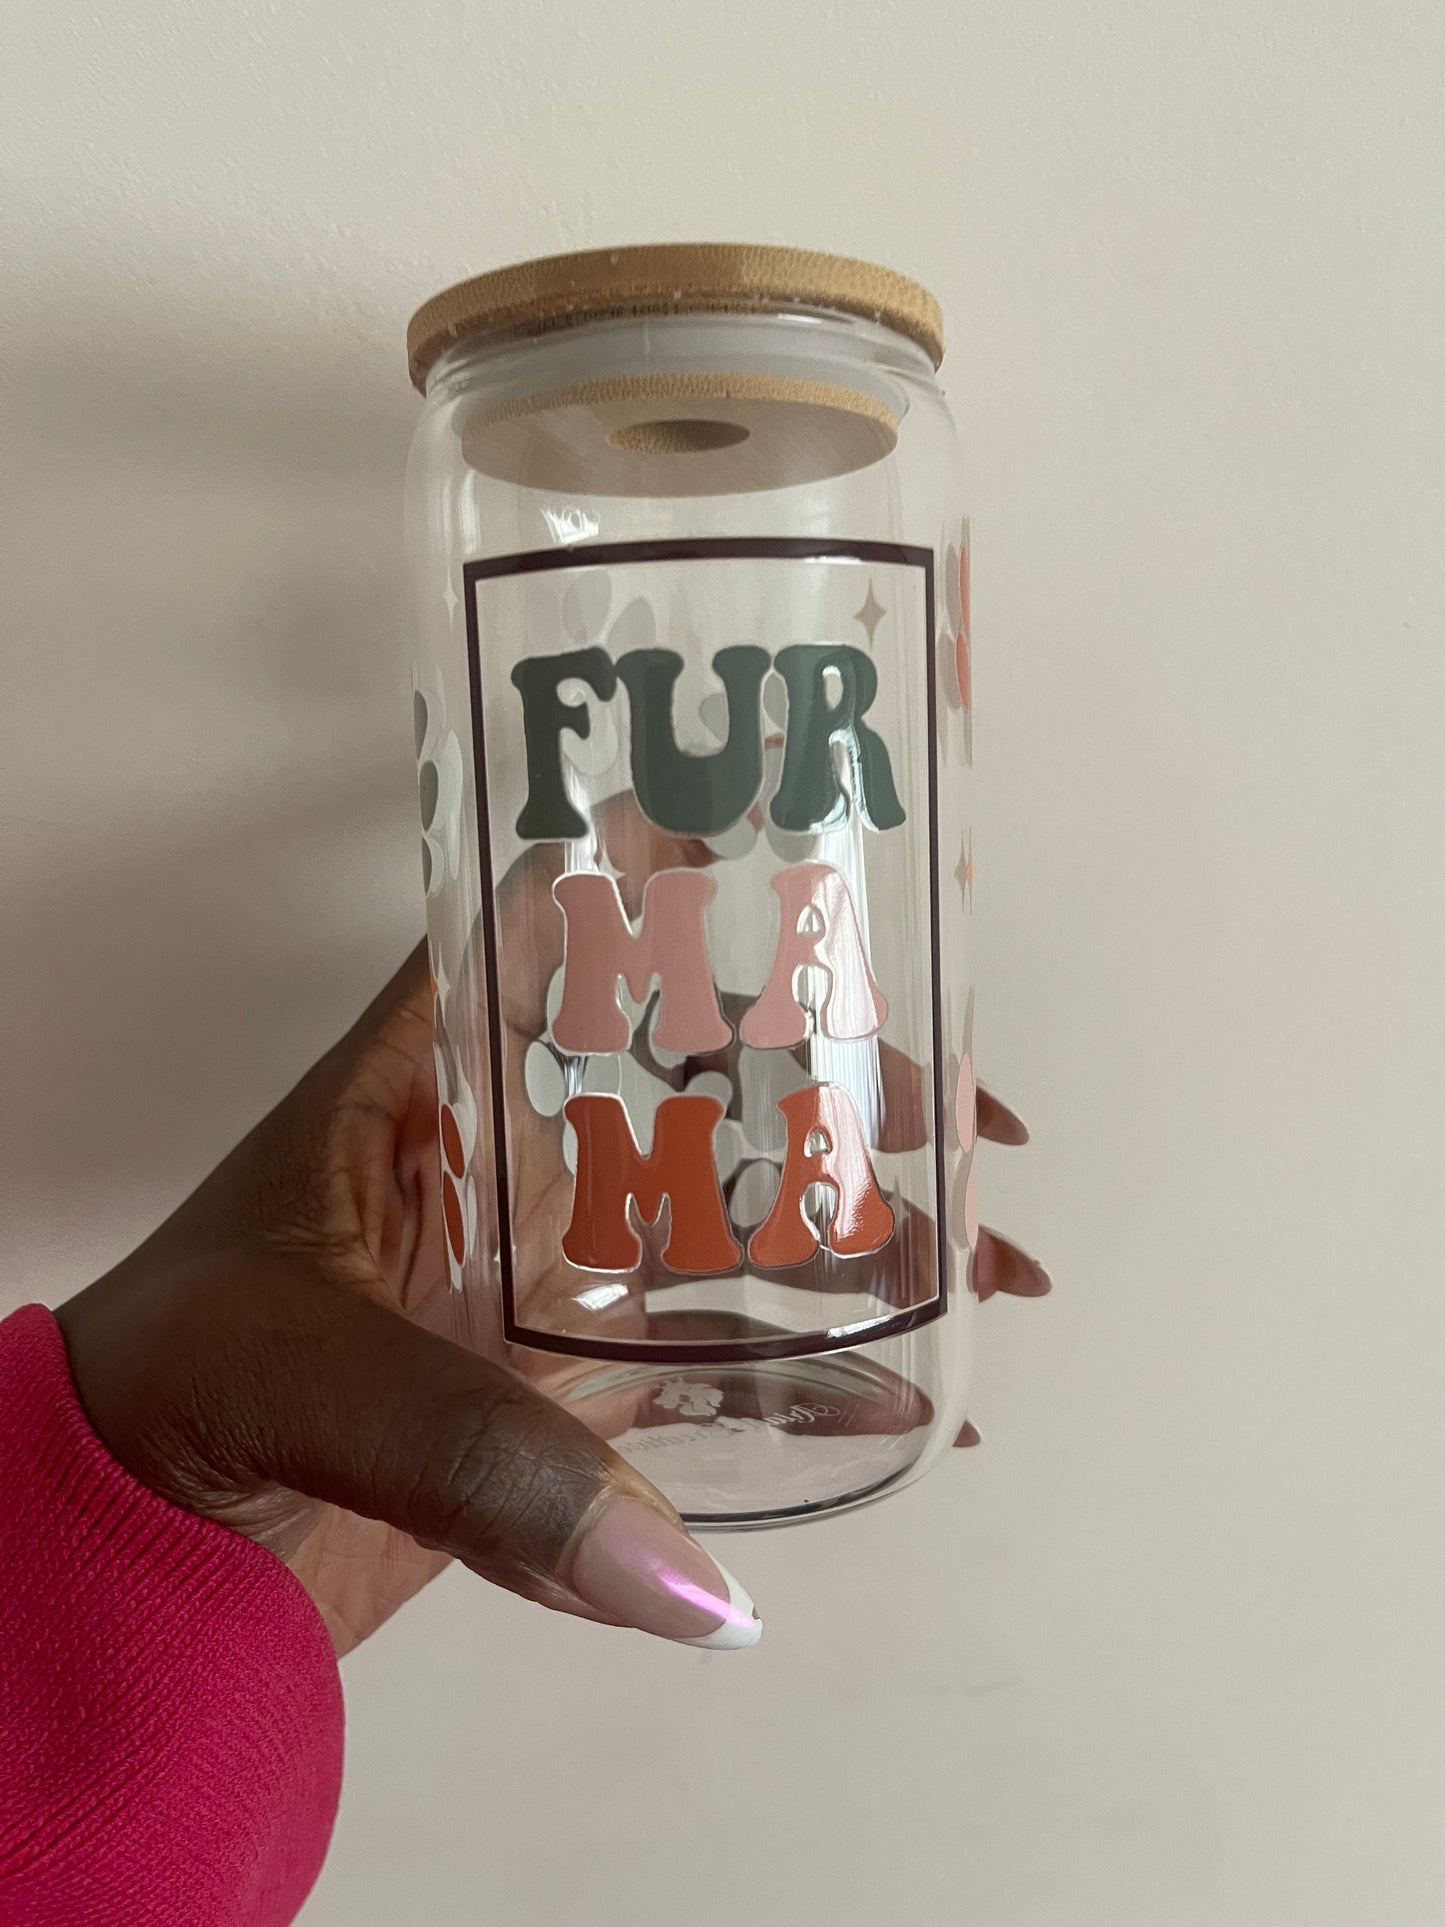 Fur Mama Glass Cup- Perfect gift for the Fur Mamas